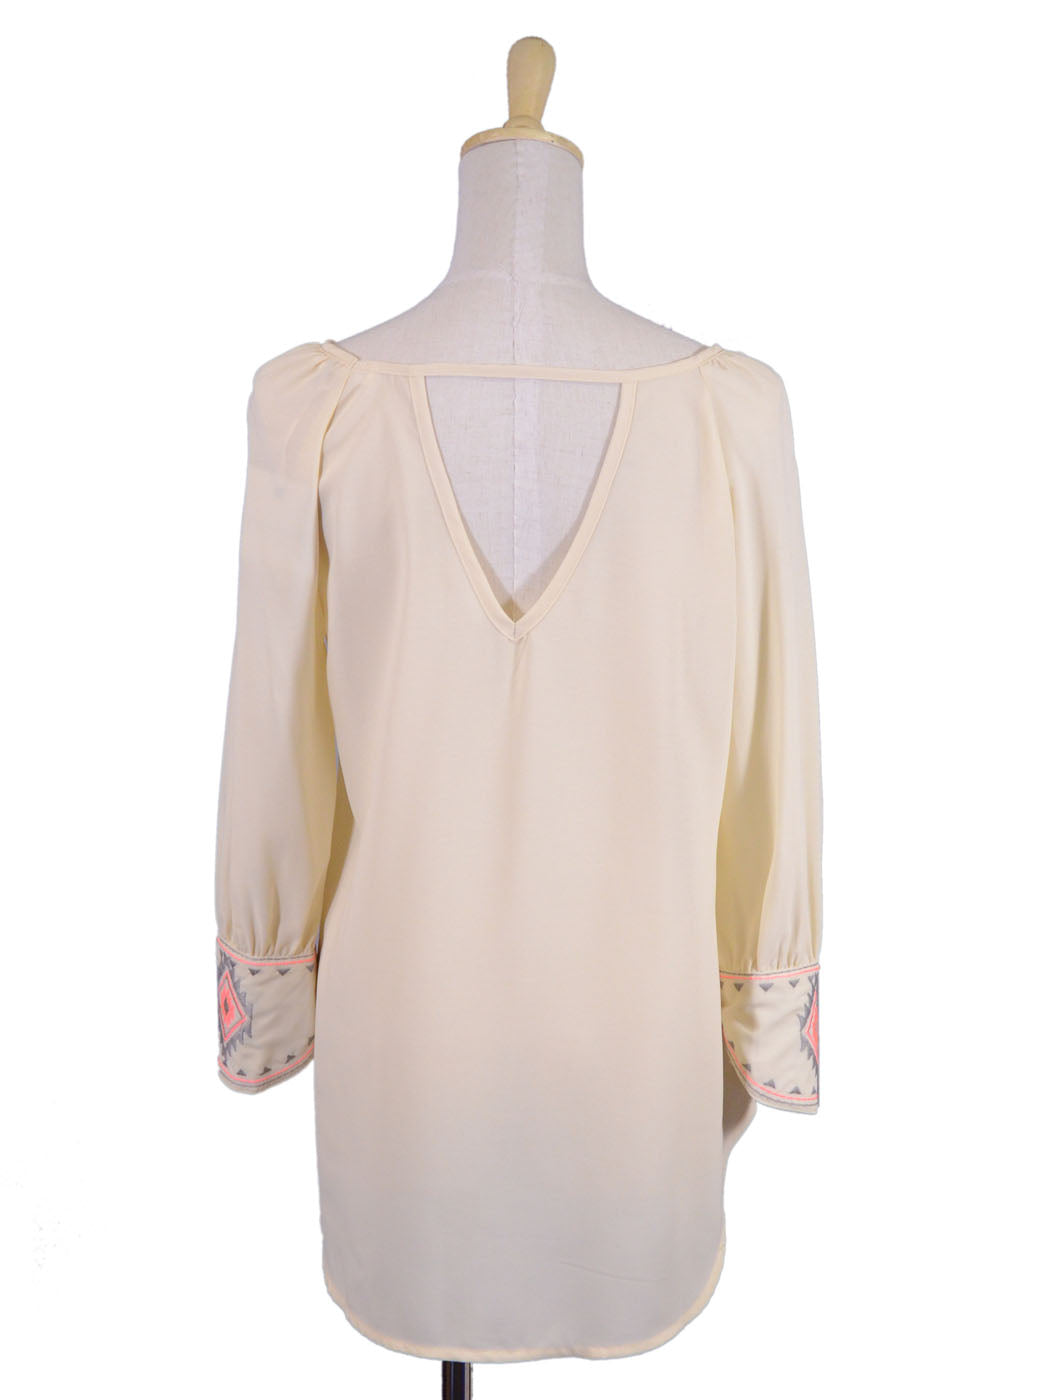 Blu Pepper Beige Long Sleeve Top With Embroidery Sleeve Design - ALILANG.COM